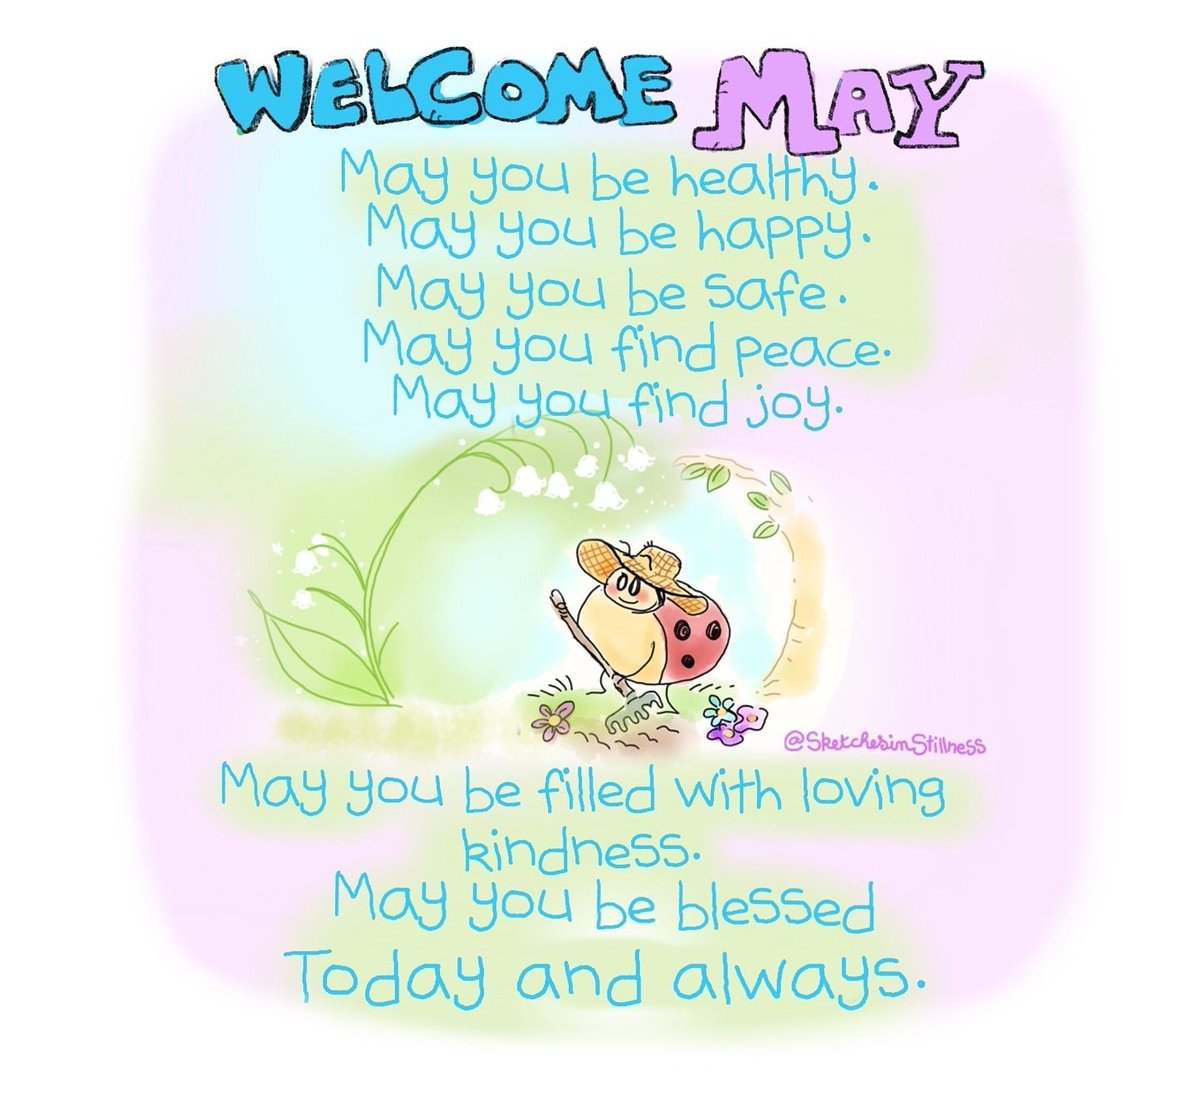 Happy May everyone ❤️ May you be healthy. May you be happy. May you be safe. May you find peace. May you find joy. May you be filled with loving kindness. May you be blessed today and always.